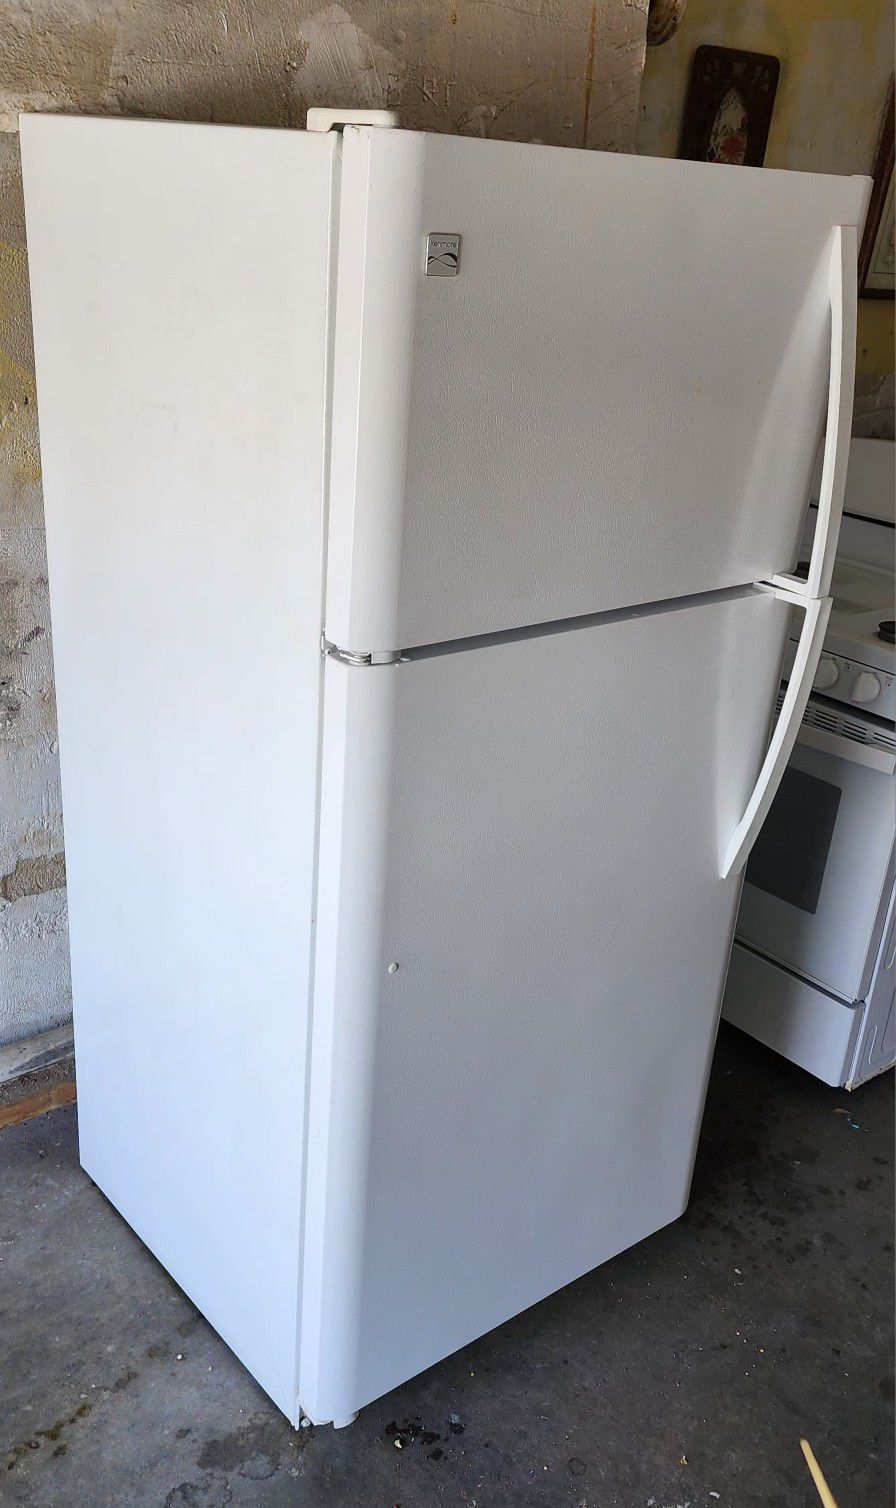 Kenmore Refrigerator Freezer On Top - Pick Up Only